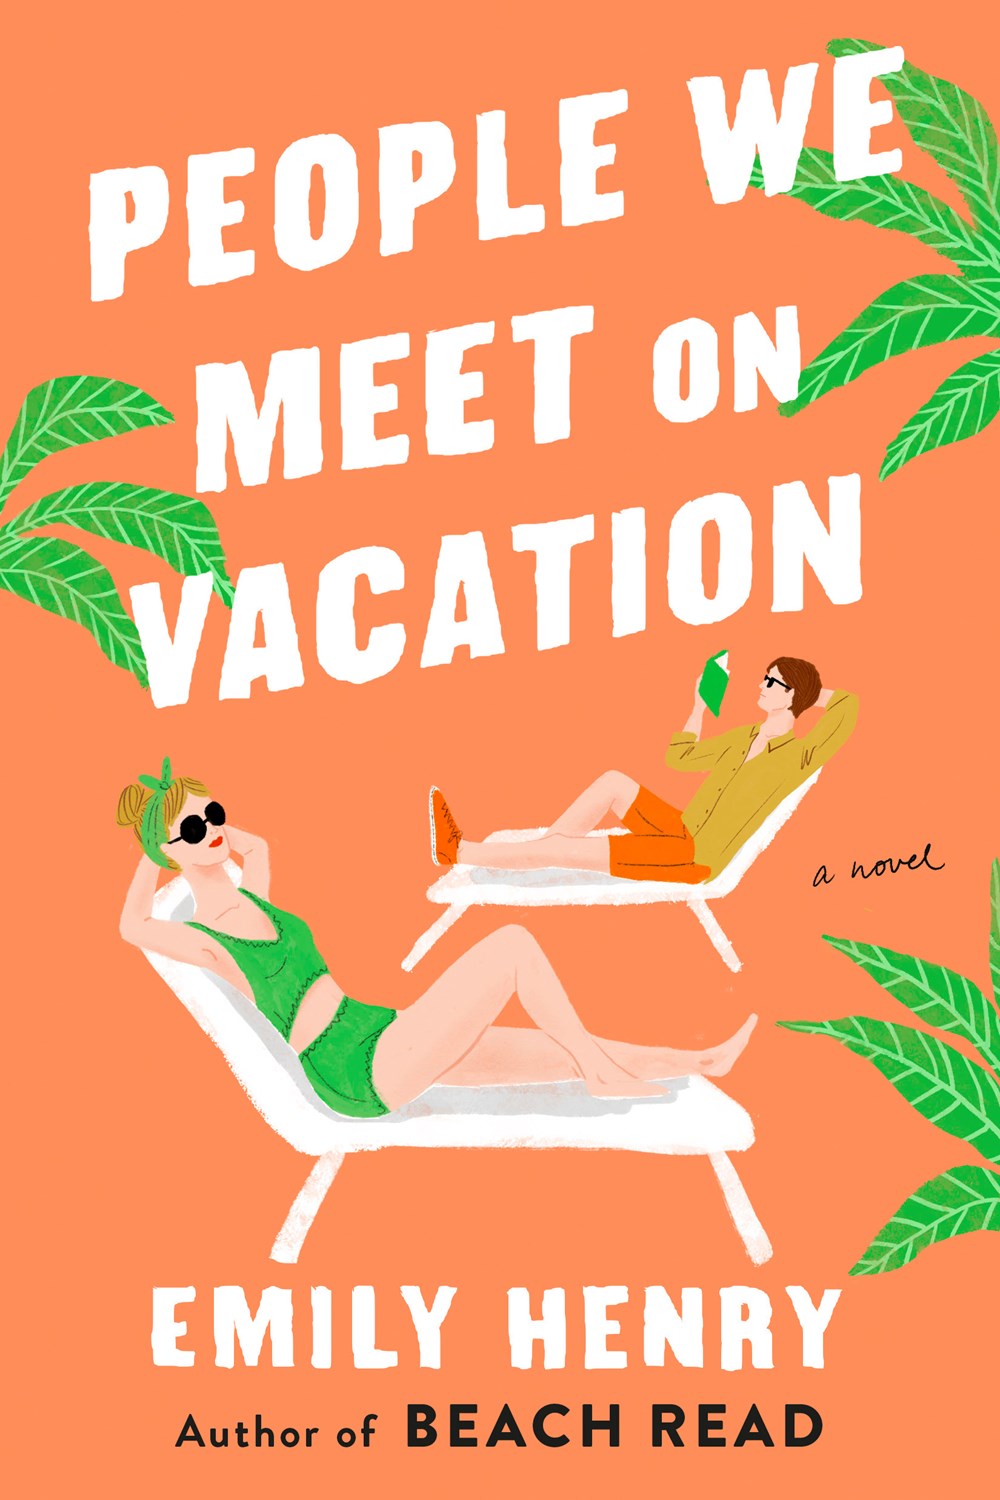 Read-Alikes for ‘People We Meet on Vacation,’ by Emily Henry | LibraryReads